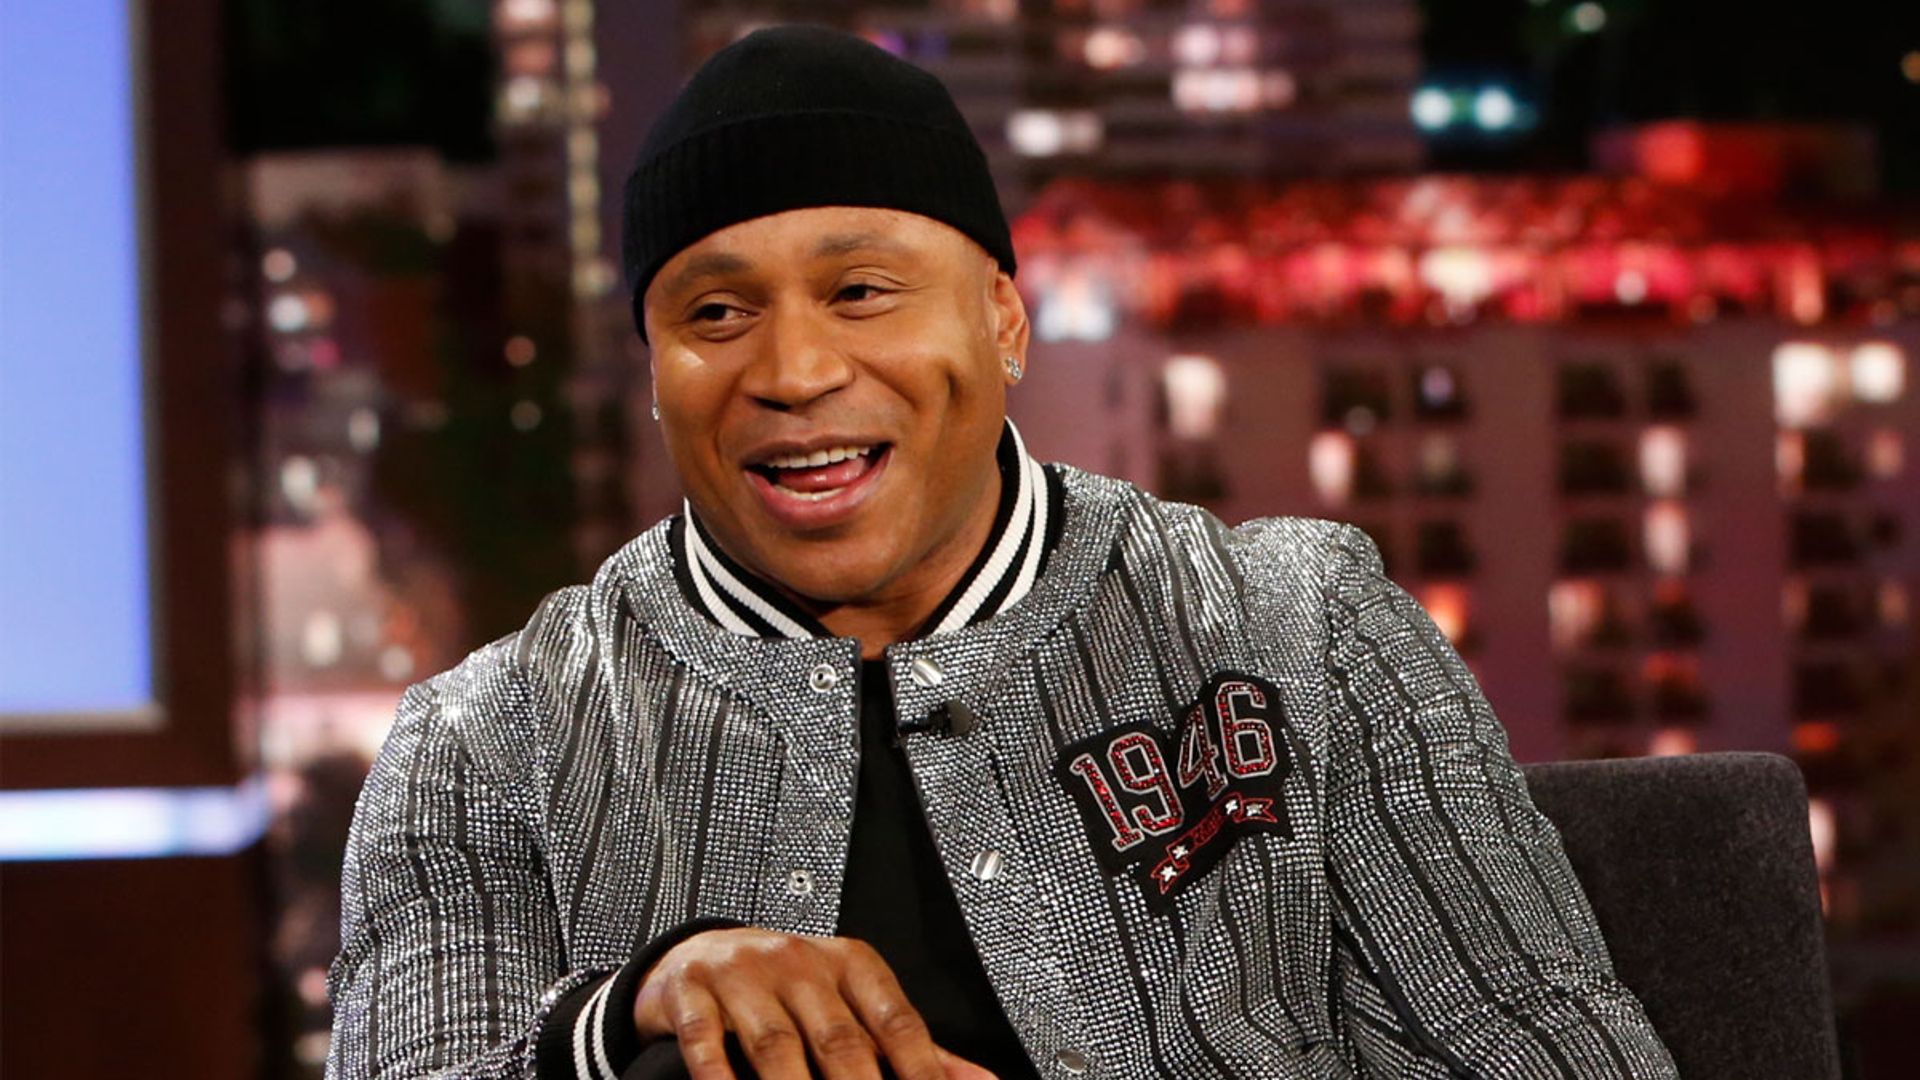 How did NCIS: Los Angeles star LL Cool J get his name?